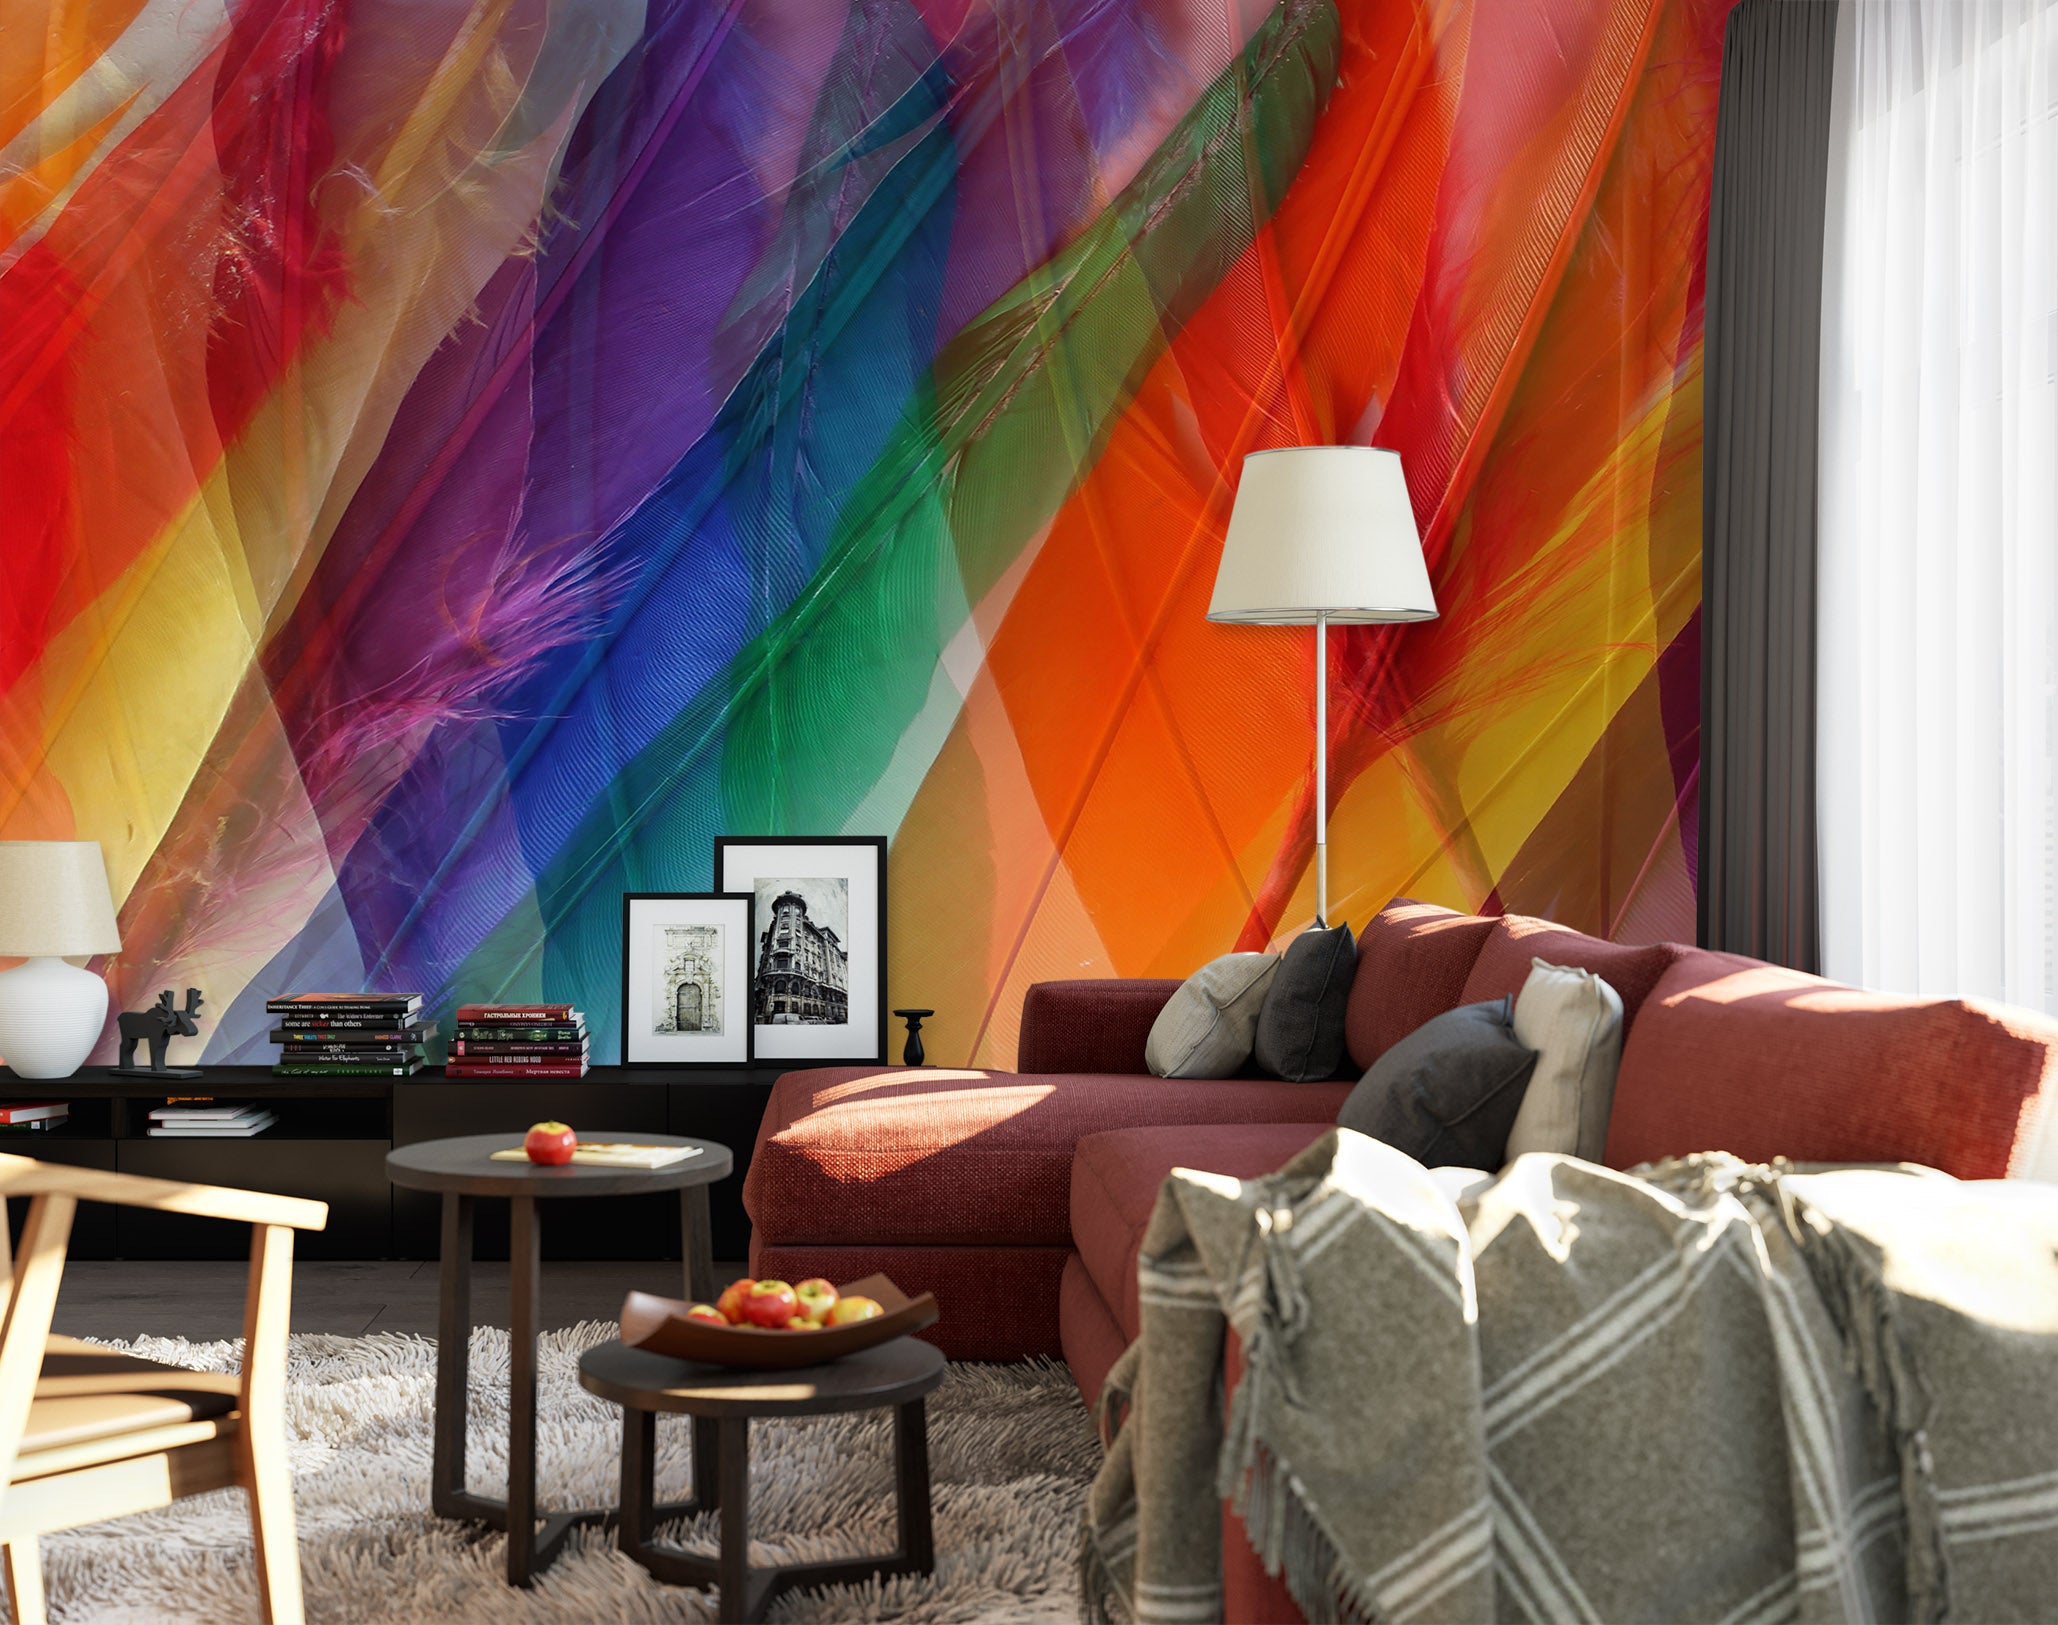 3D Colored Feathers 70101 Shandra Smith Wall Mural Wall Murals